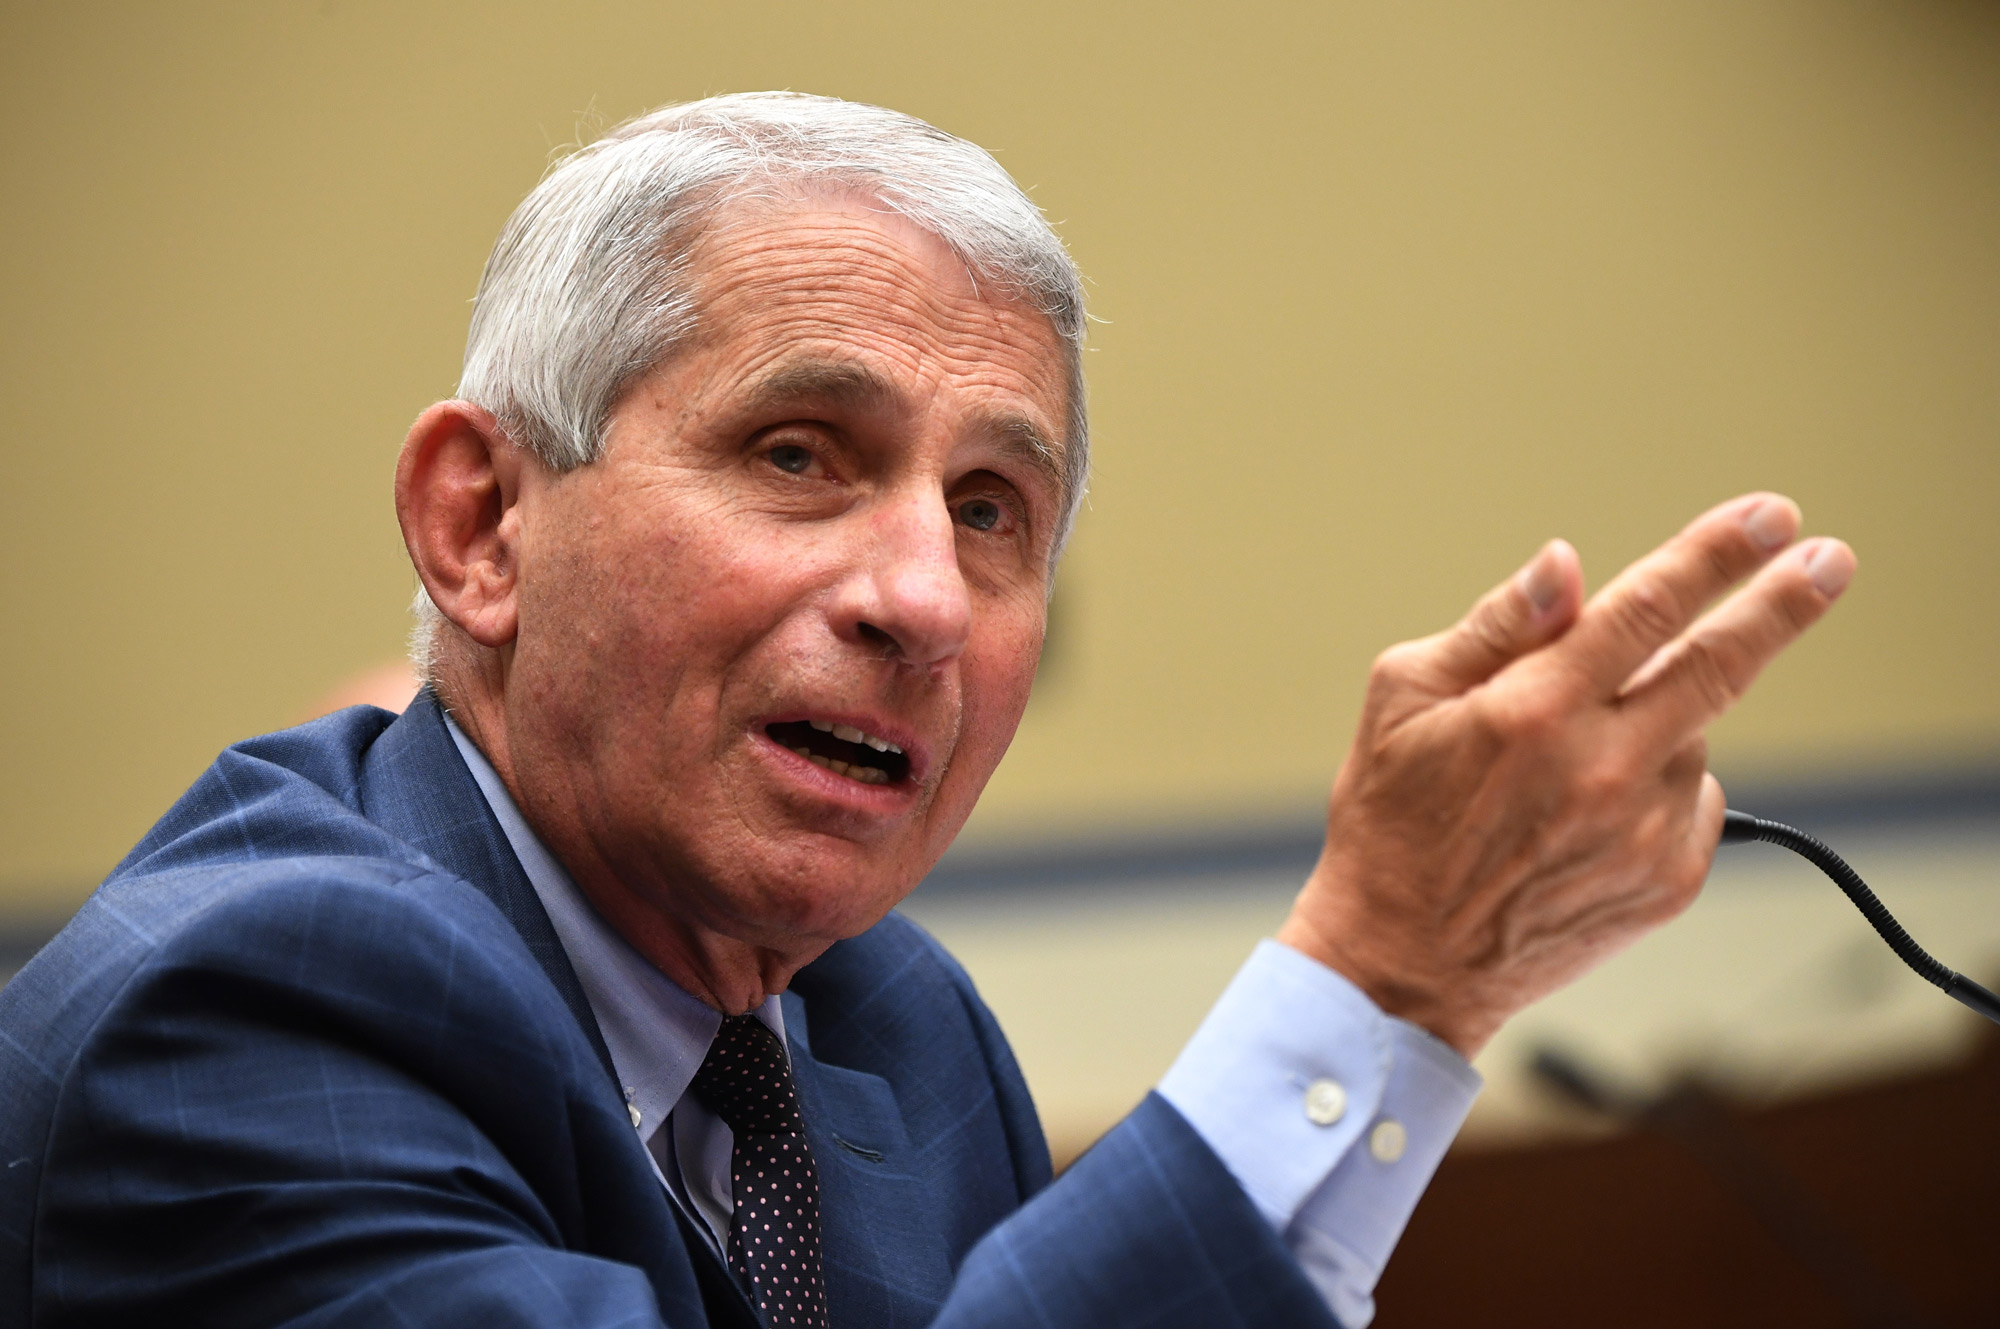 Anthony Fauci, director of the National Institute for Allergy and Infectious Diseases, testifies during a House Subcommittee on the Coronavirus Crisis hearing on Capitol Hill in Washington, DC, on July 31.